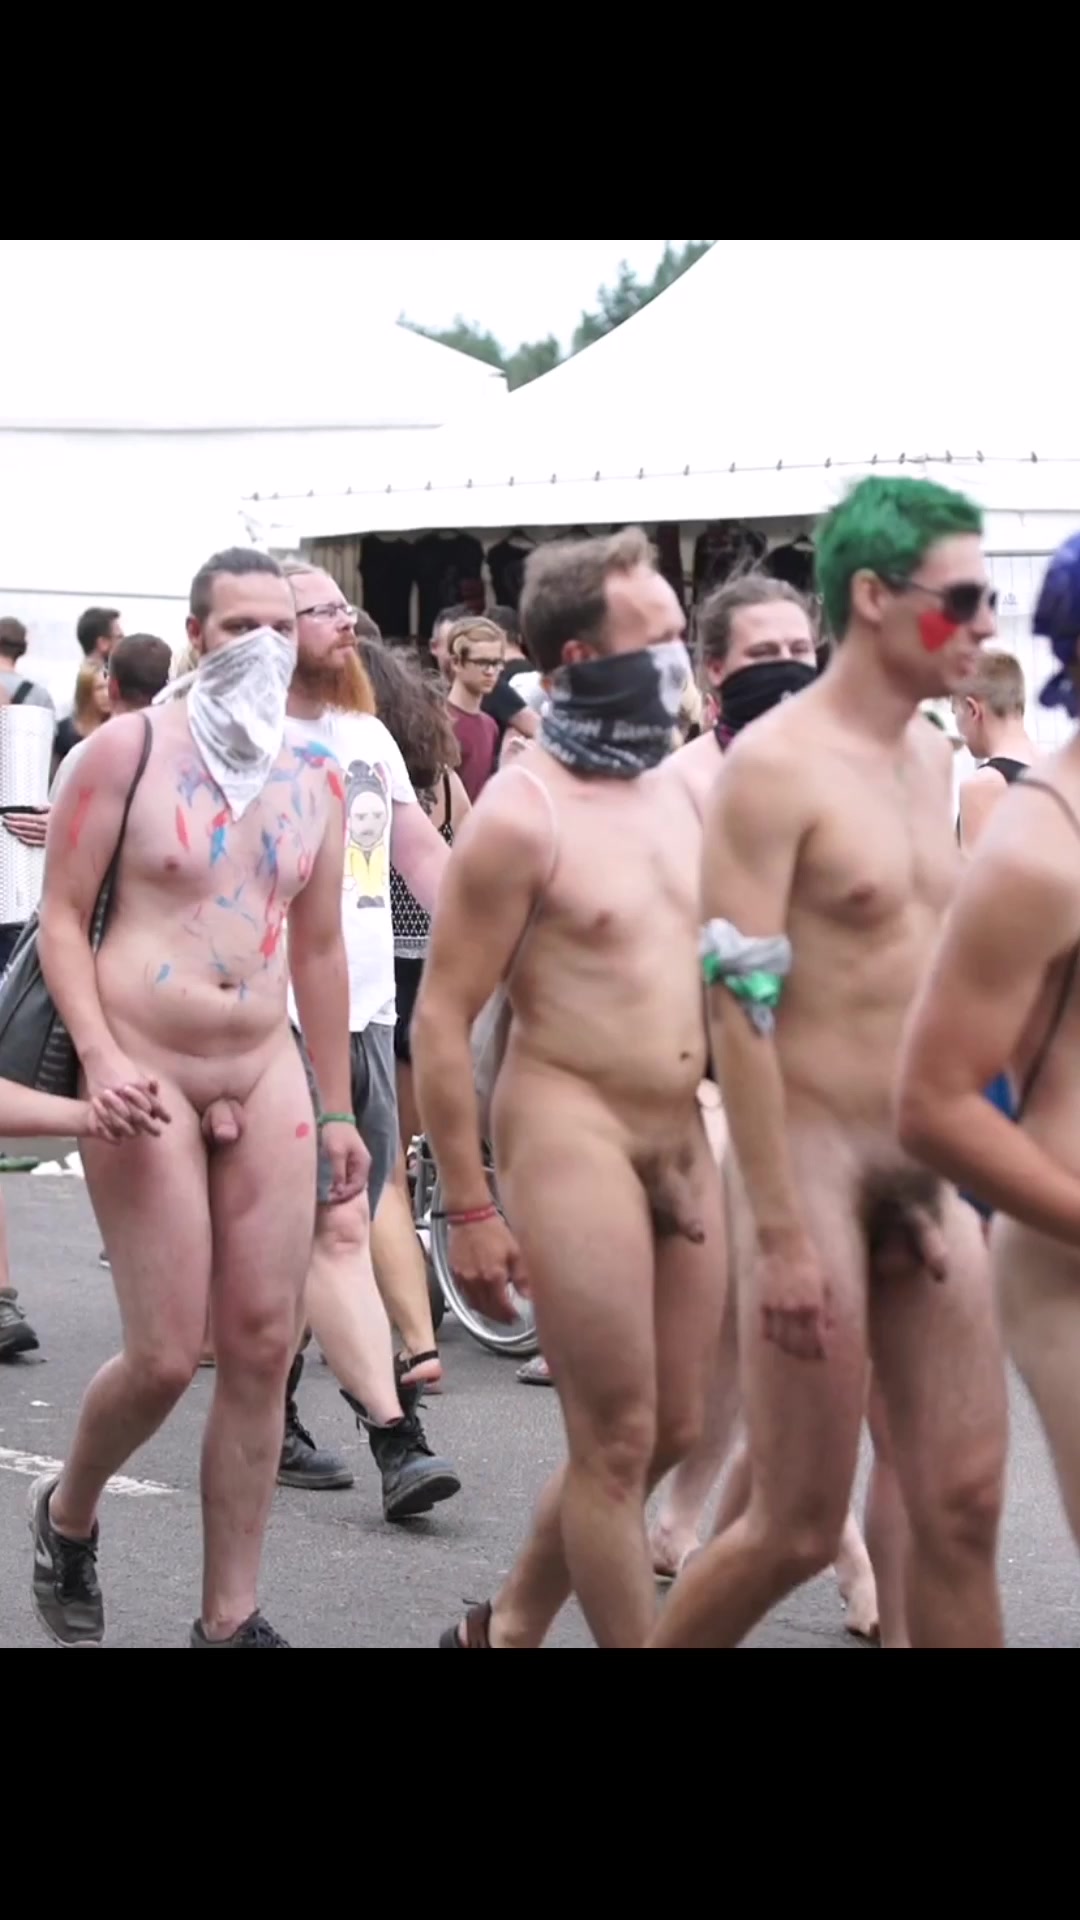 Young guys naked in public festival